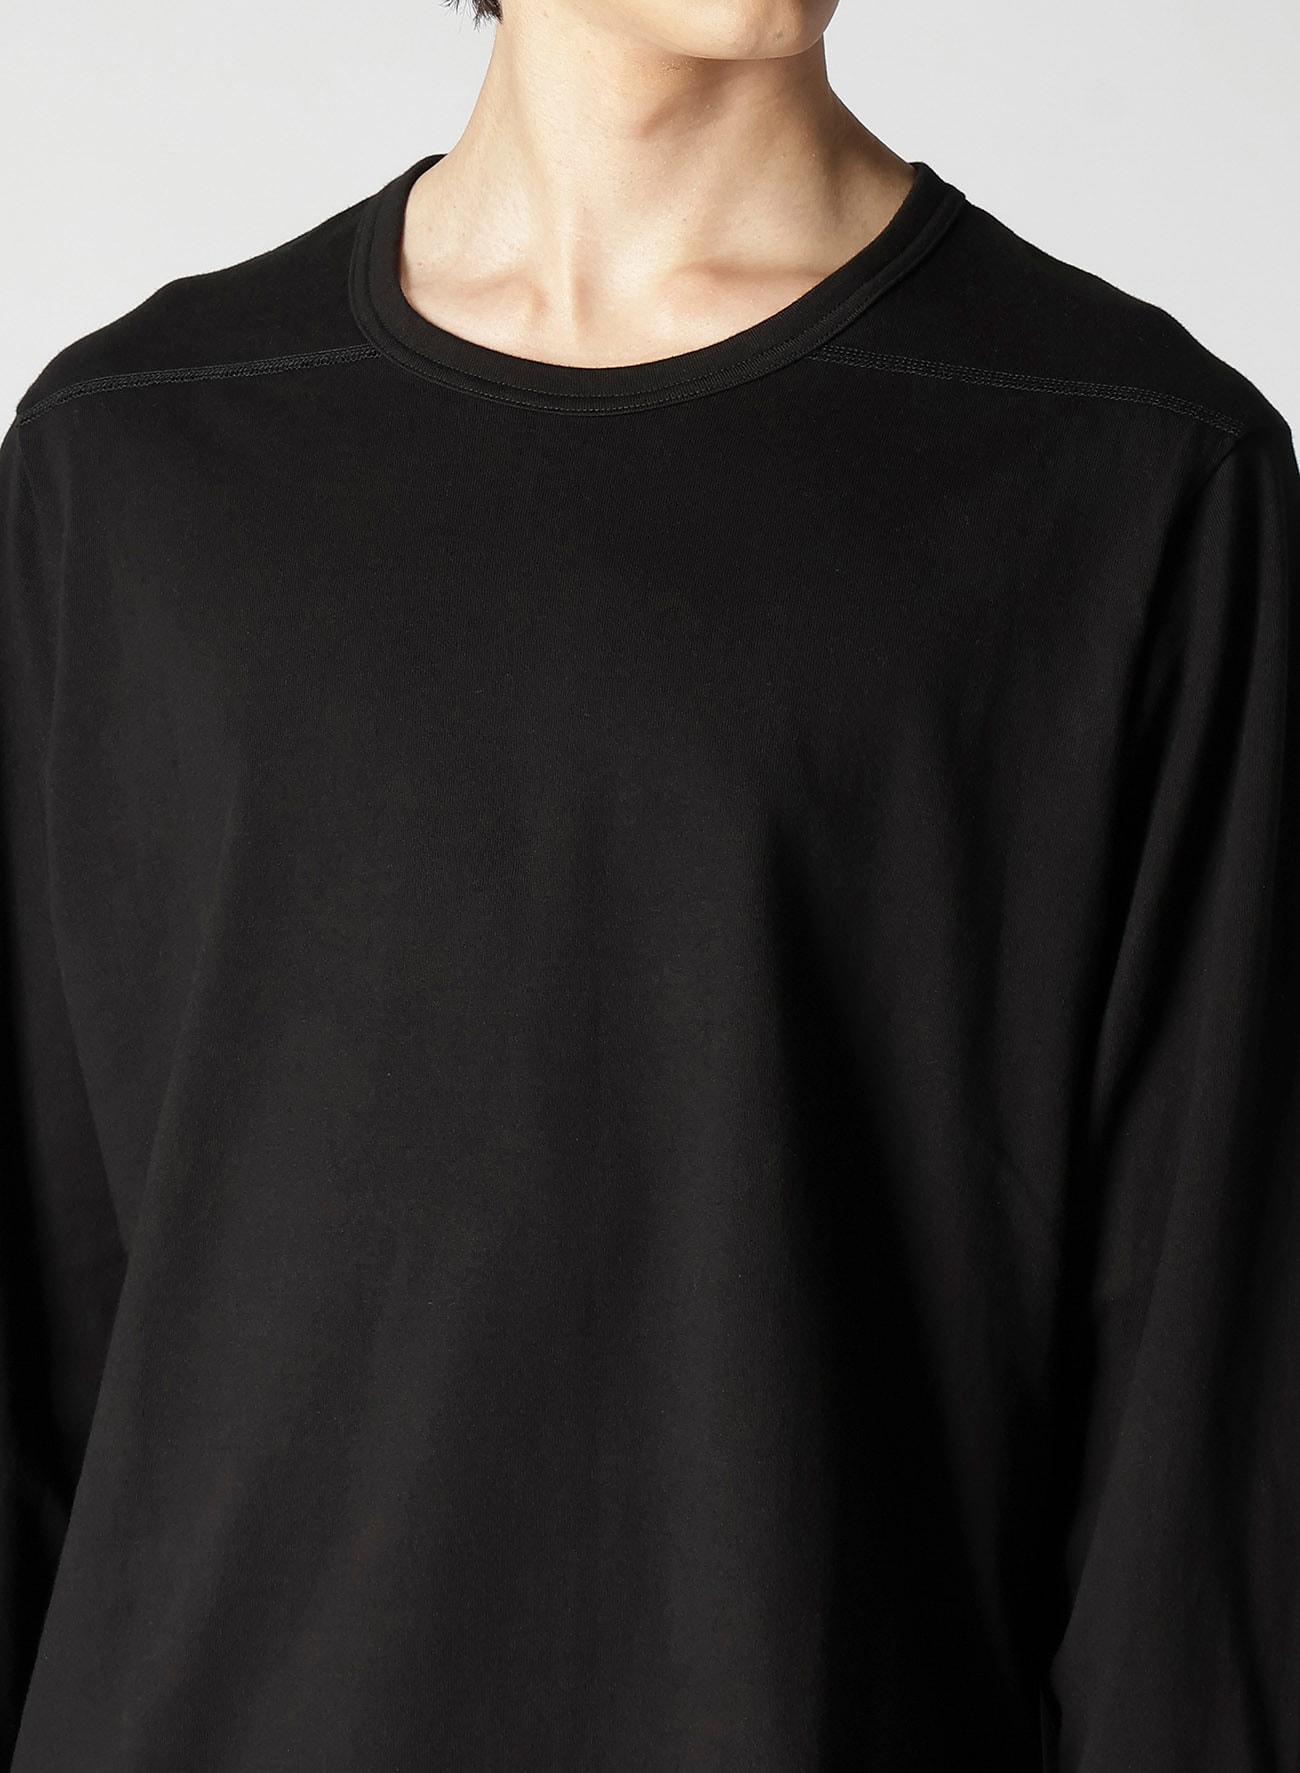 30/2 TIGHT TENSION SINGLE JERSEY RE SHOULDER PANEL LONG SLEEVE T